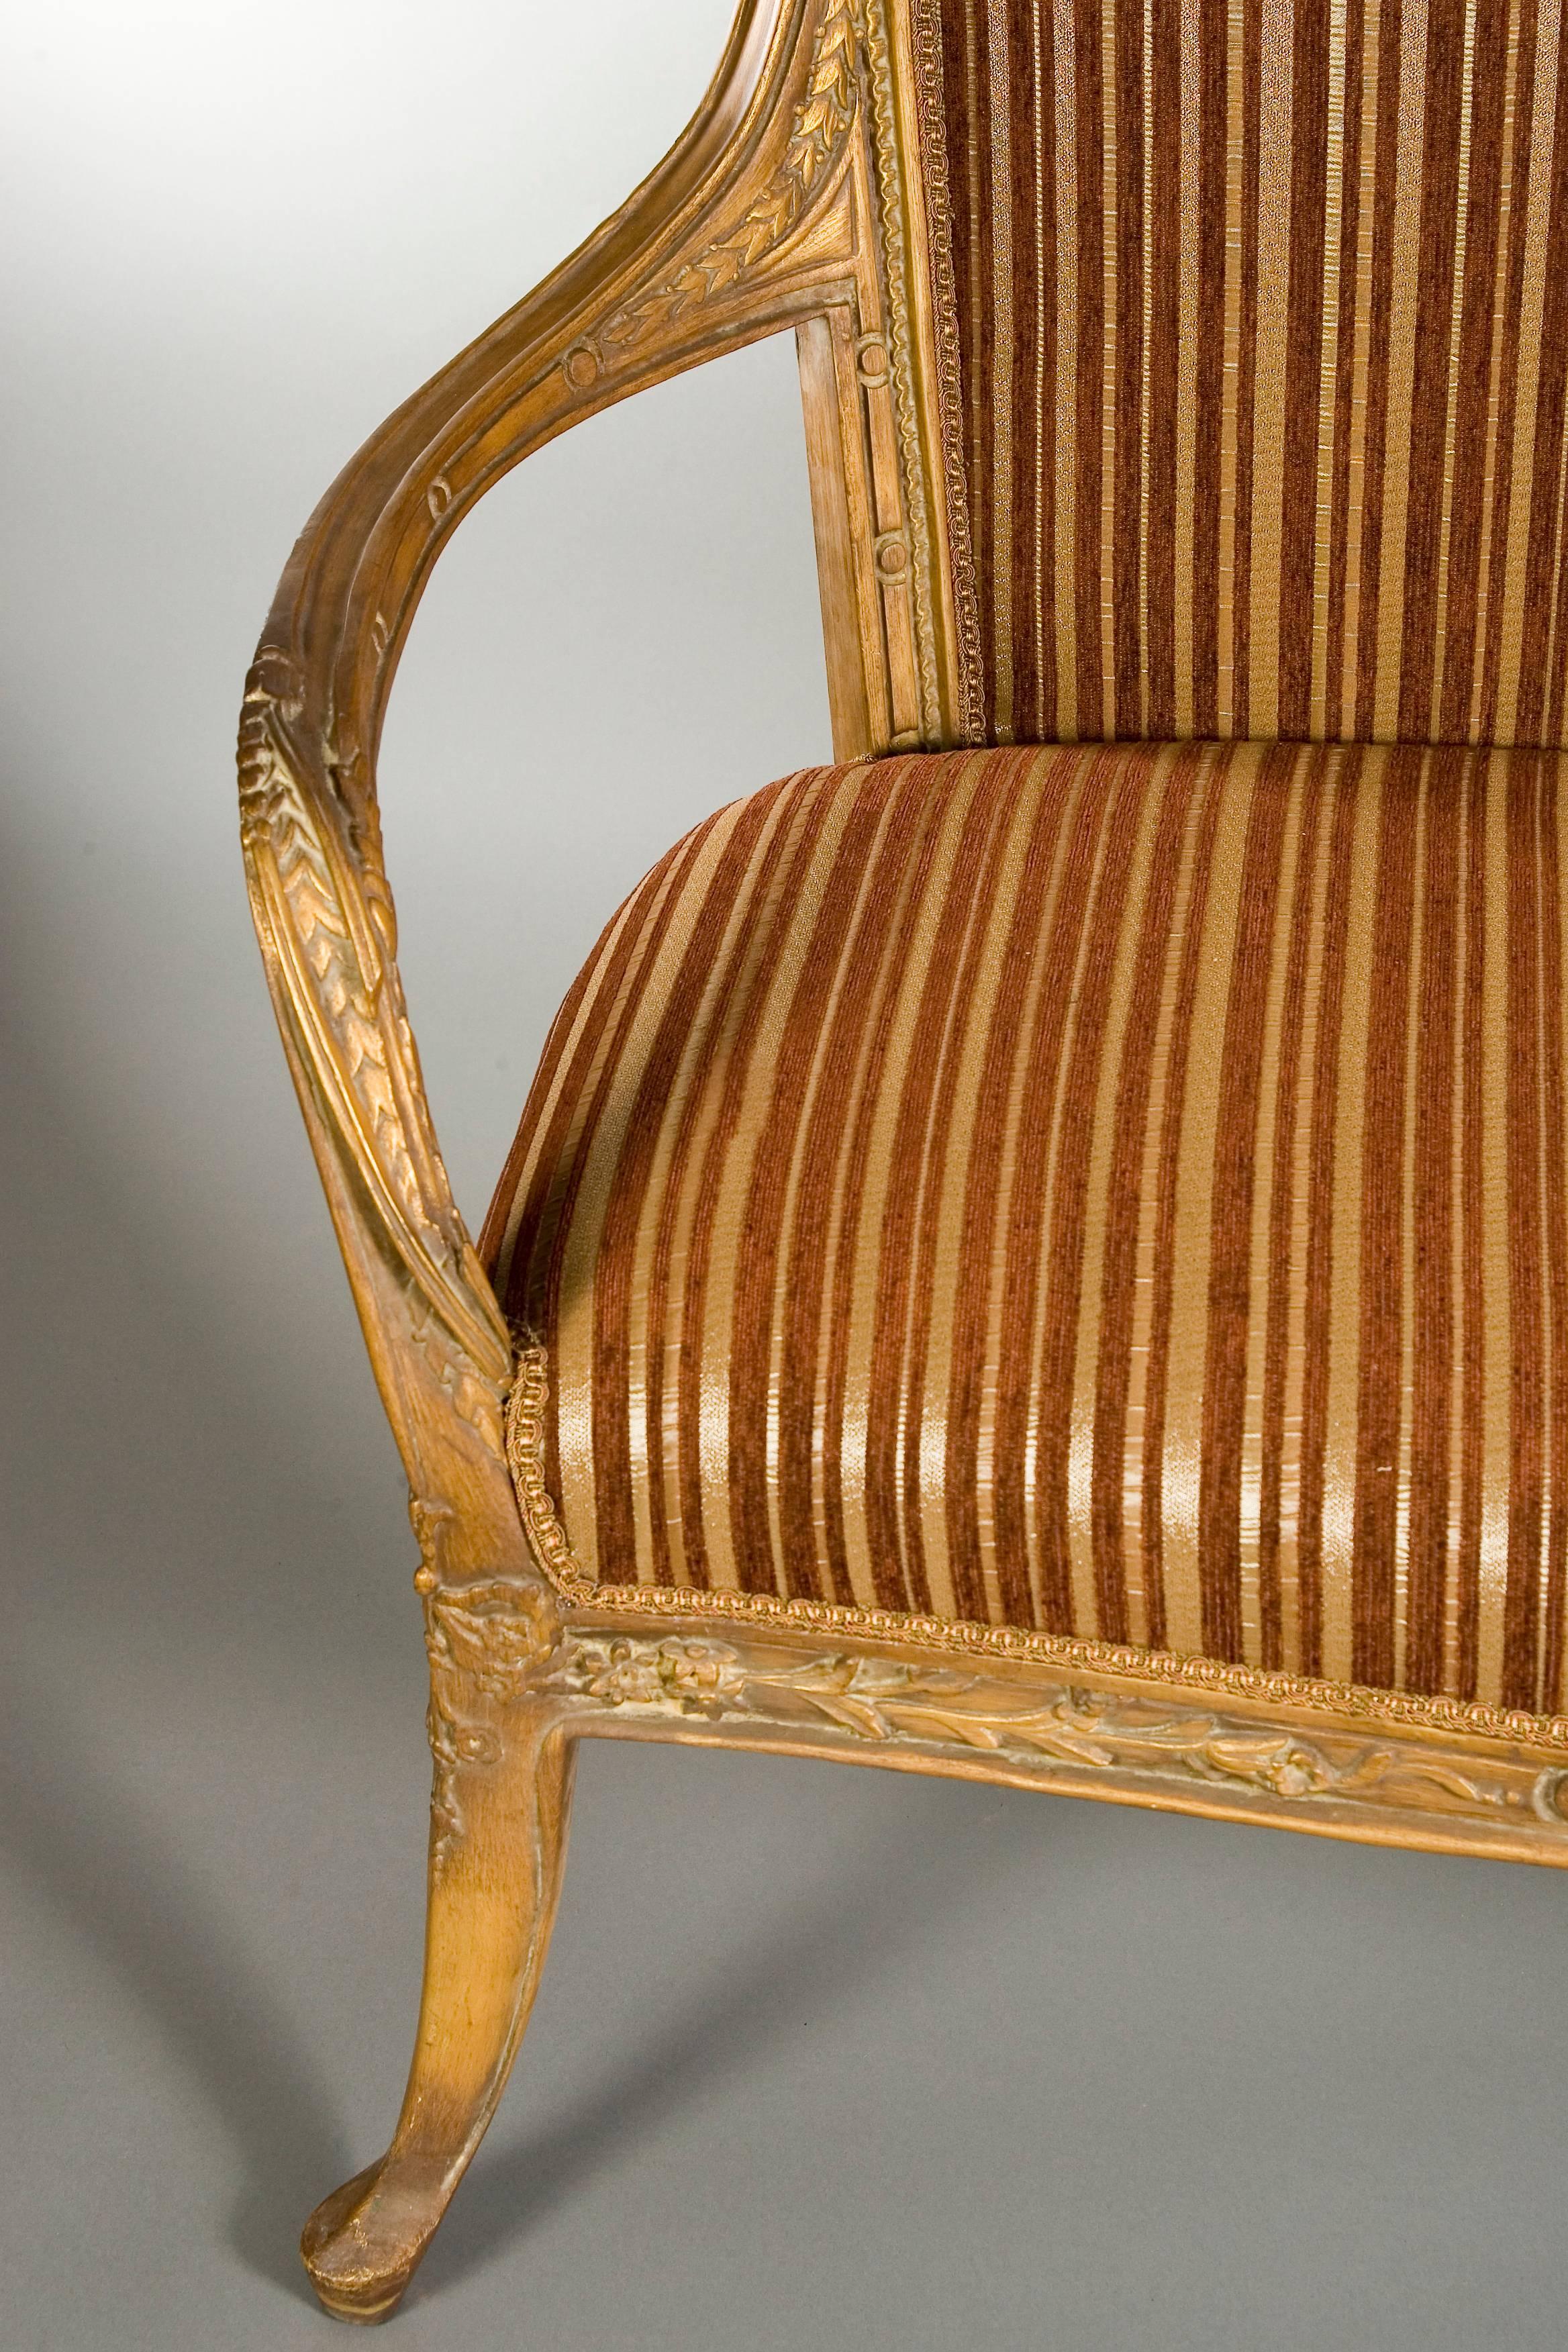 20th Century French Sofa in the Art Nouveau Style Beechwood (Vergoldet)